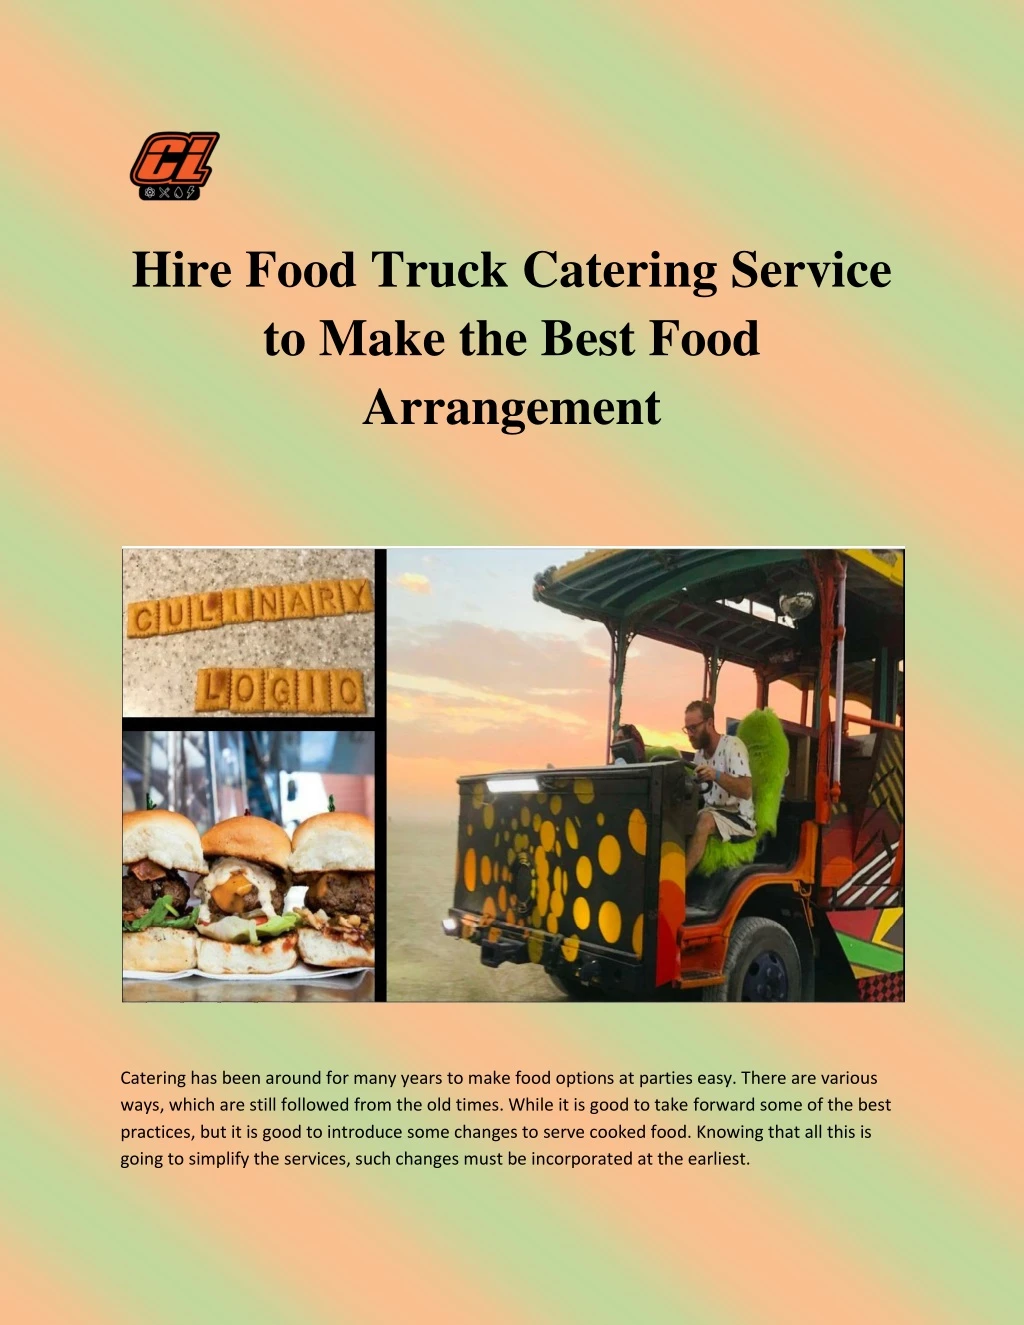 hire food truck catering service to make the best